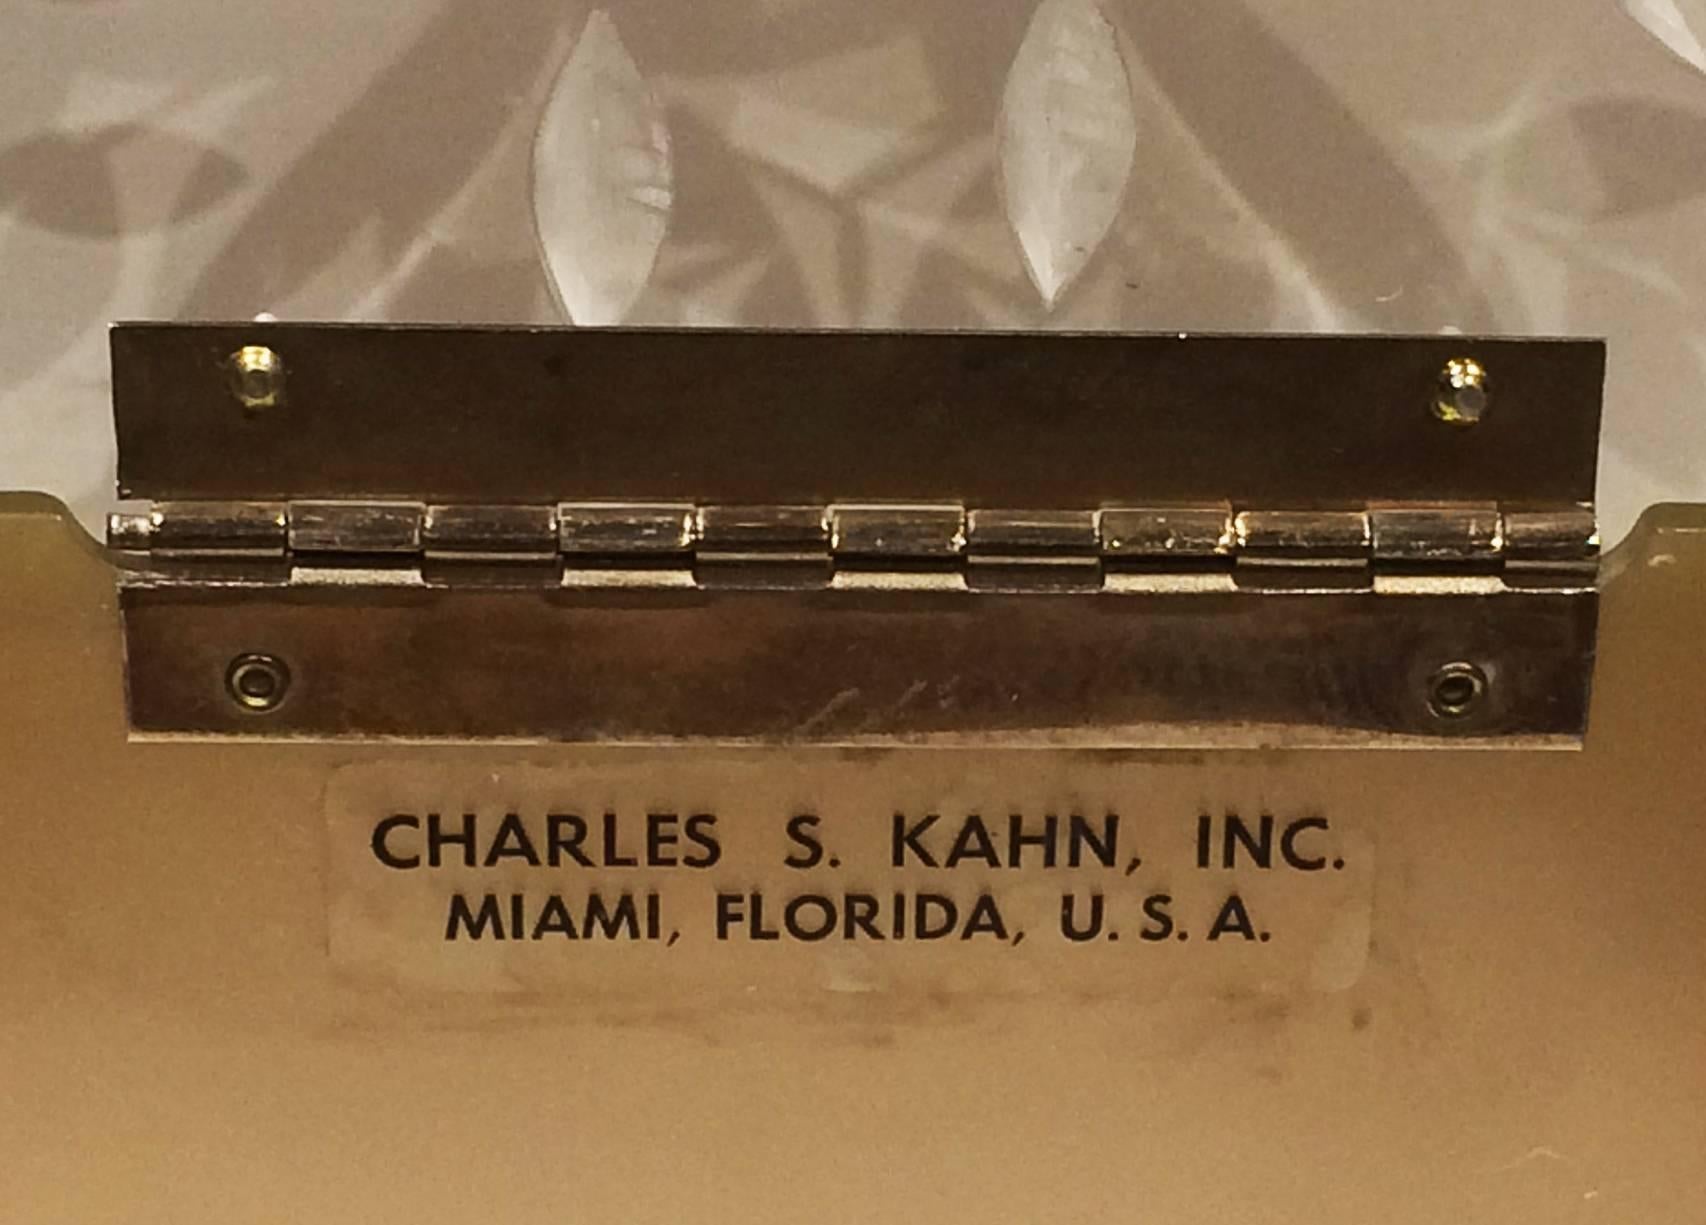 1950s lucite purse or handbag with soft gold sides, clear base, top and handle in clear with satin carved central Daisy and Leaf trims. Internally Labelled “CHARLES S. KAHN, INC.” above “MIAMI FLORIDA U. S. A. “. All metalwork, Piano Hinge, Handle